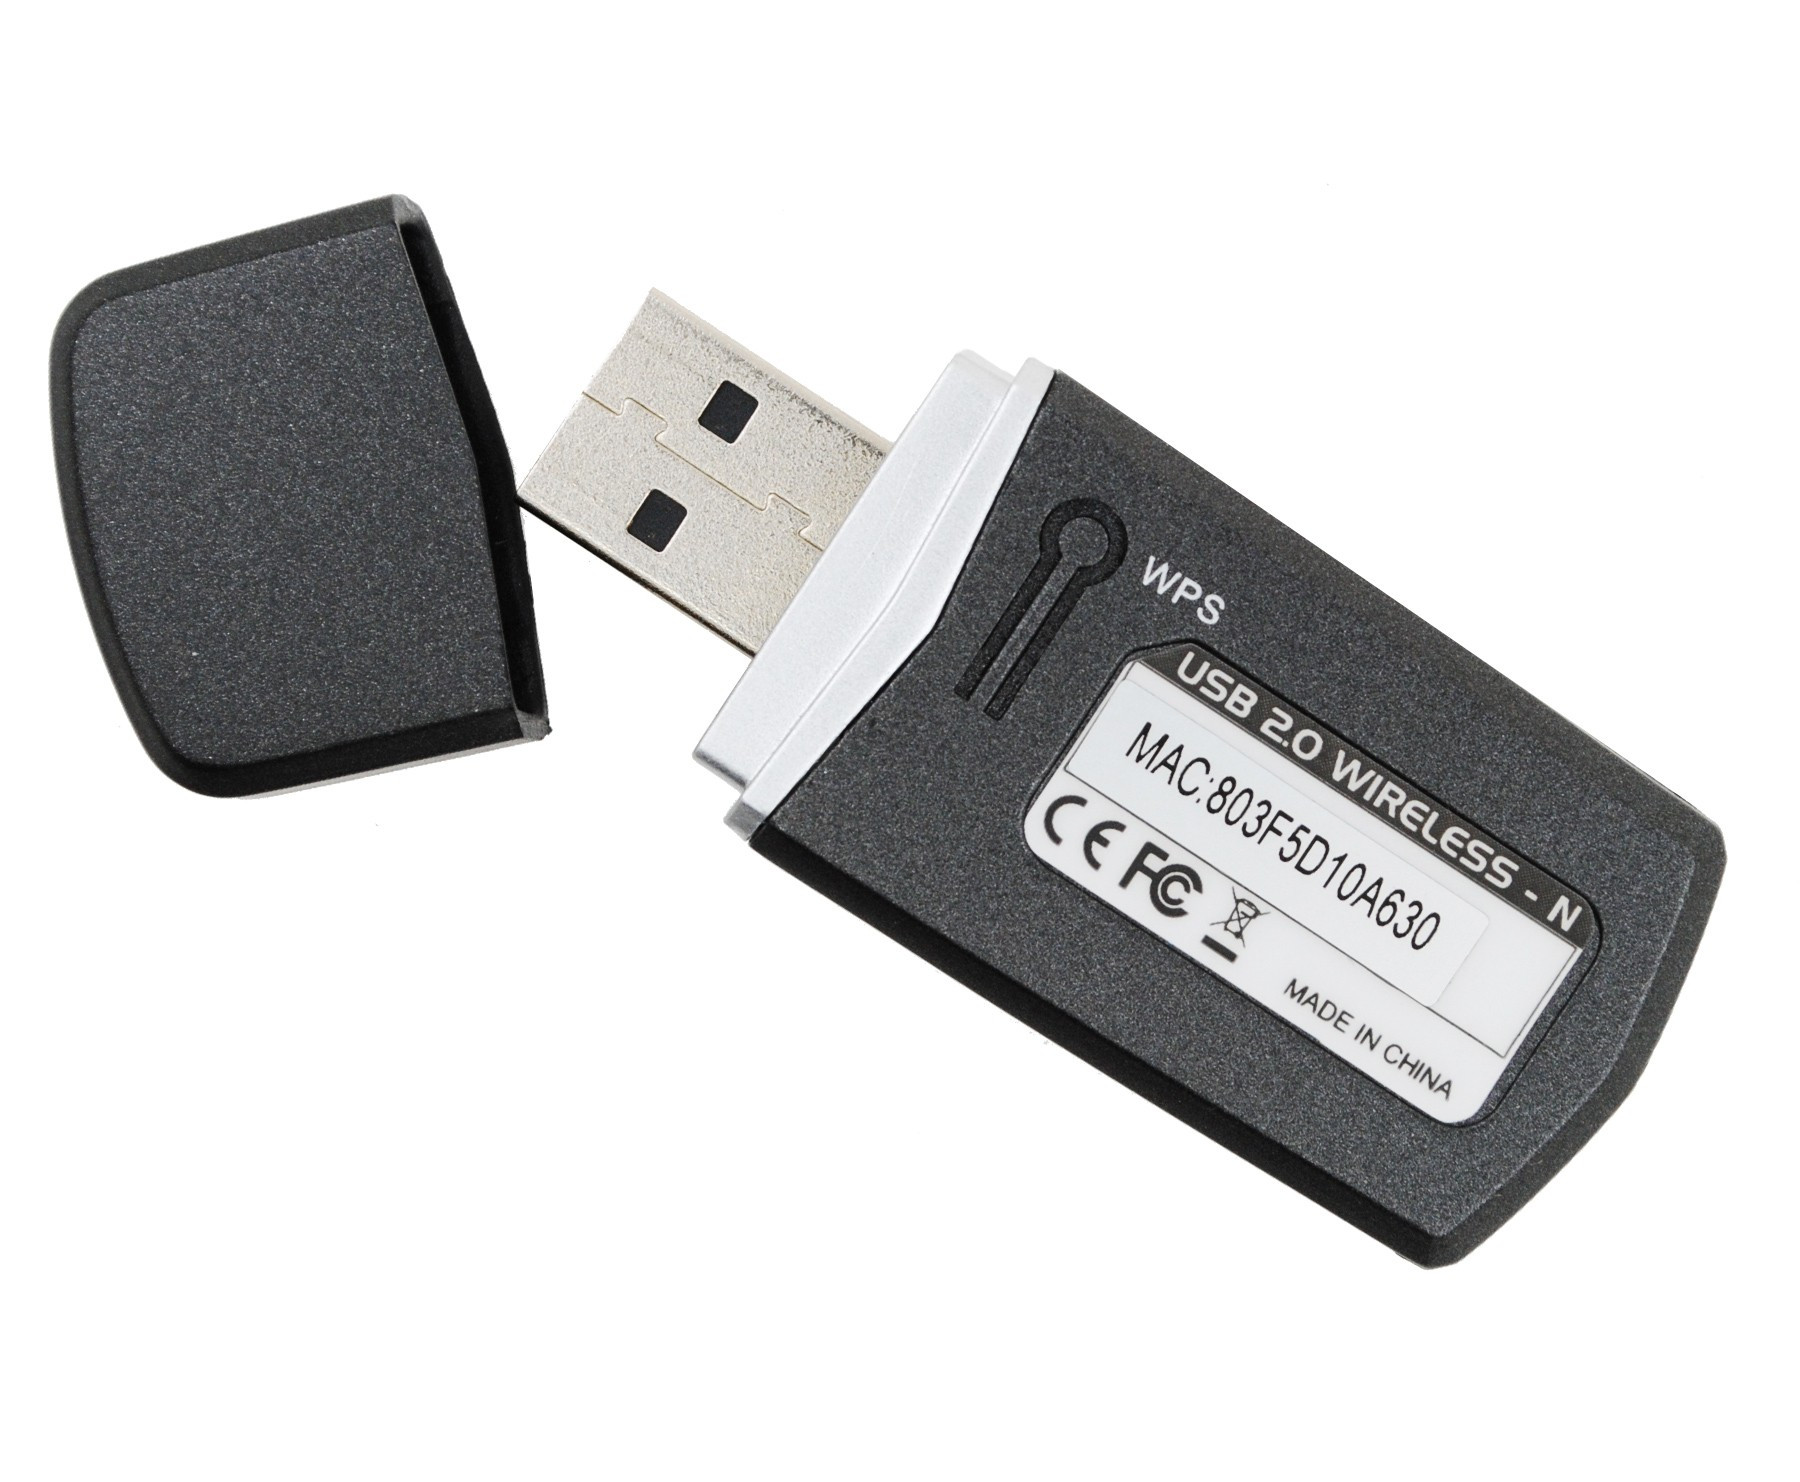 Download leapfrog usb devices drivers